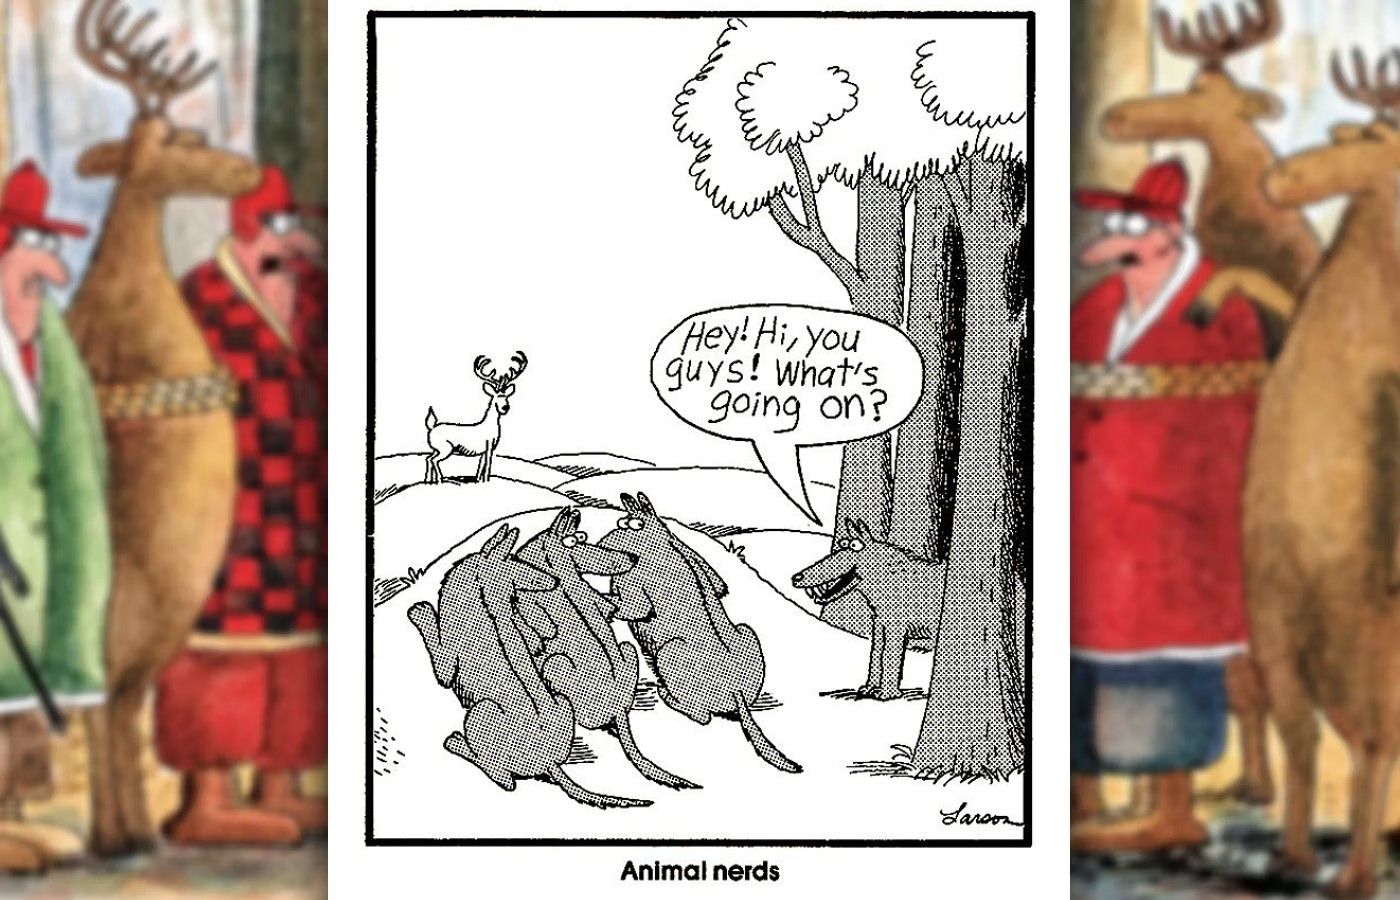 far side comic about animal nerds